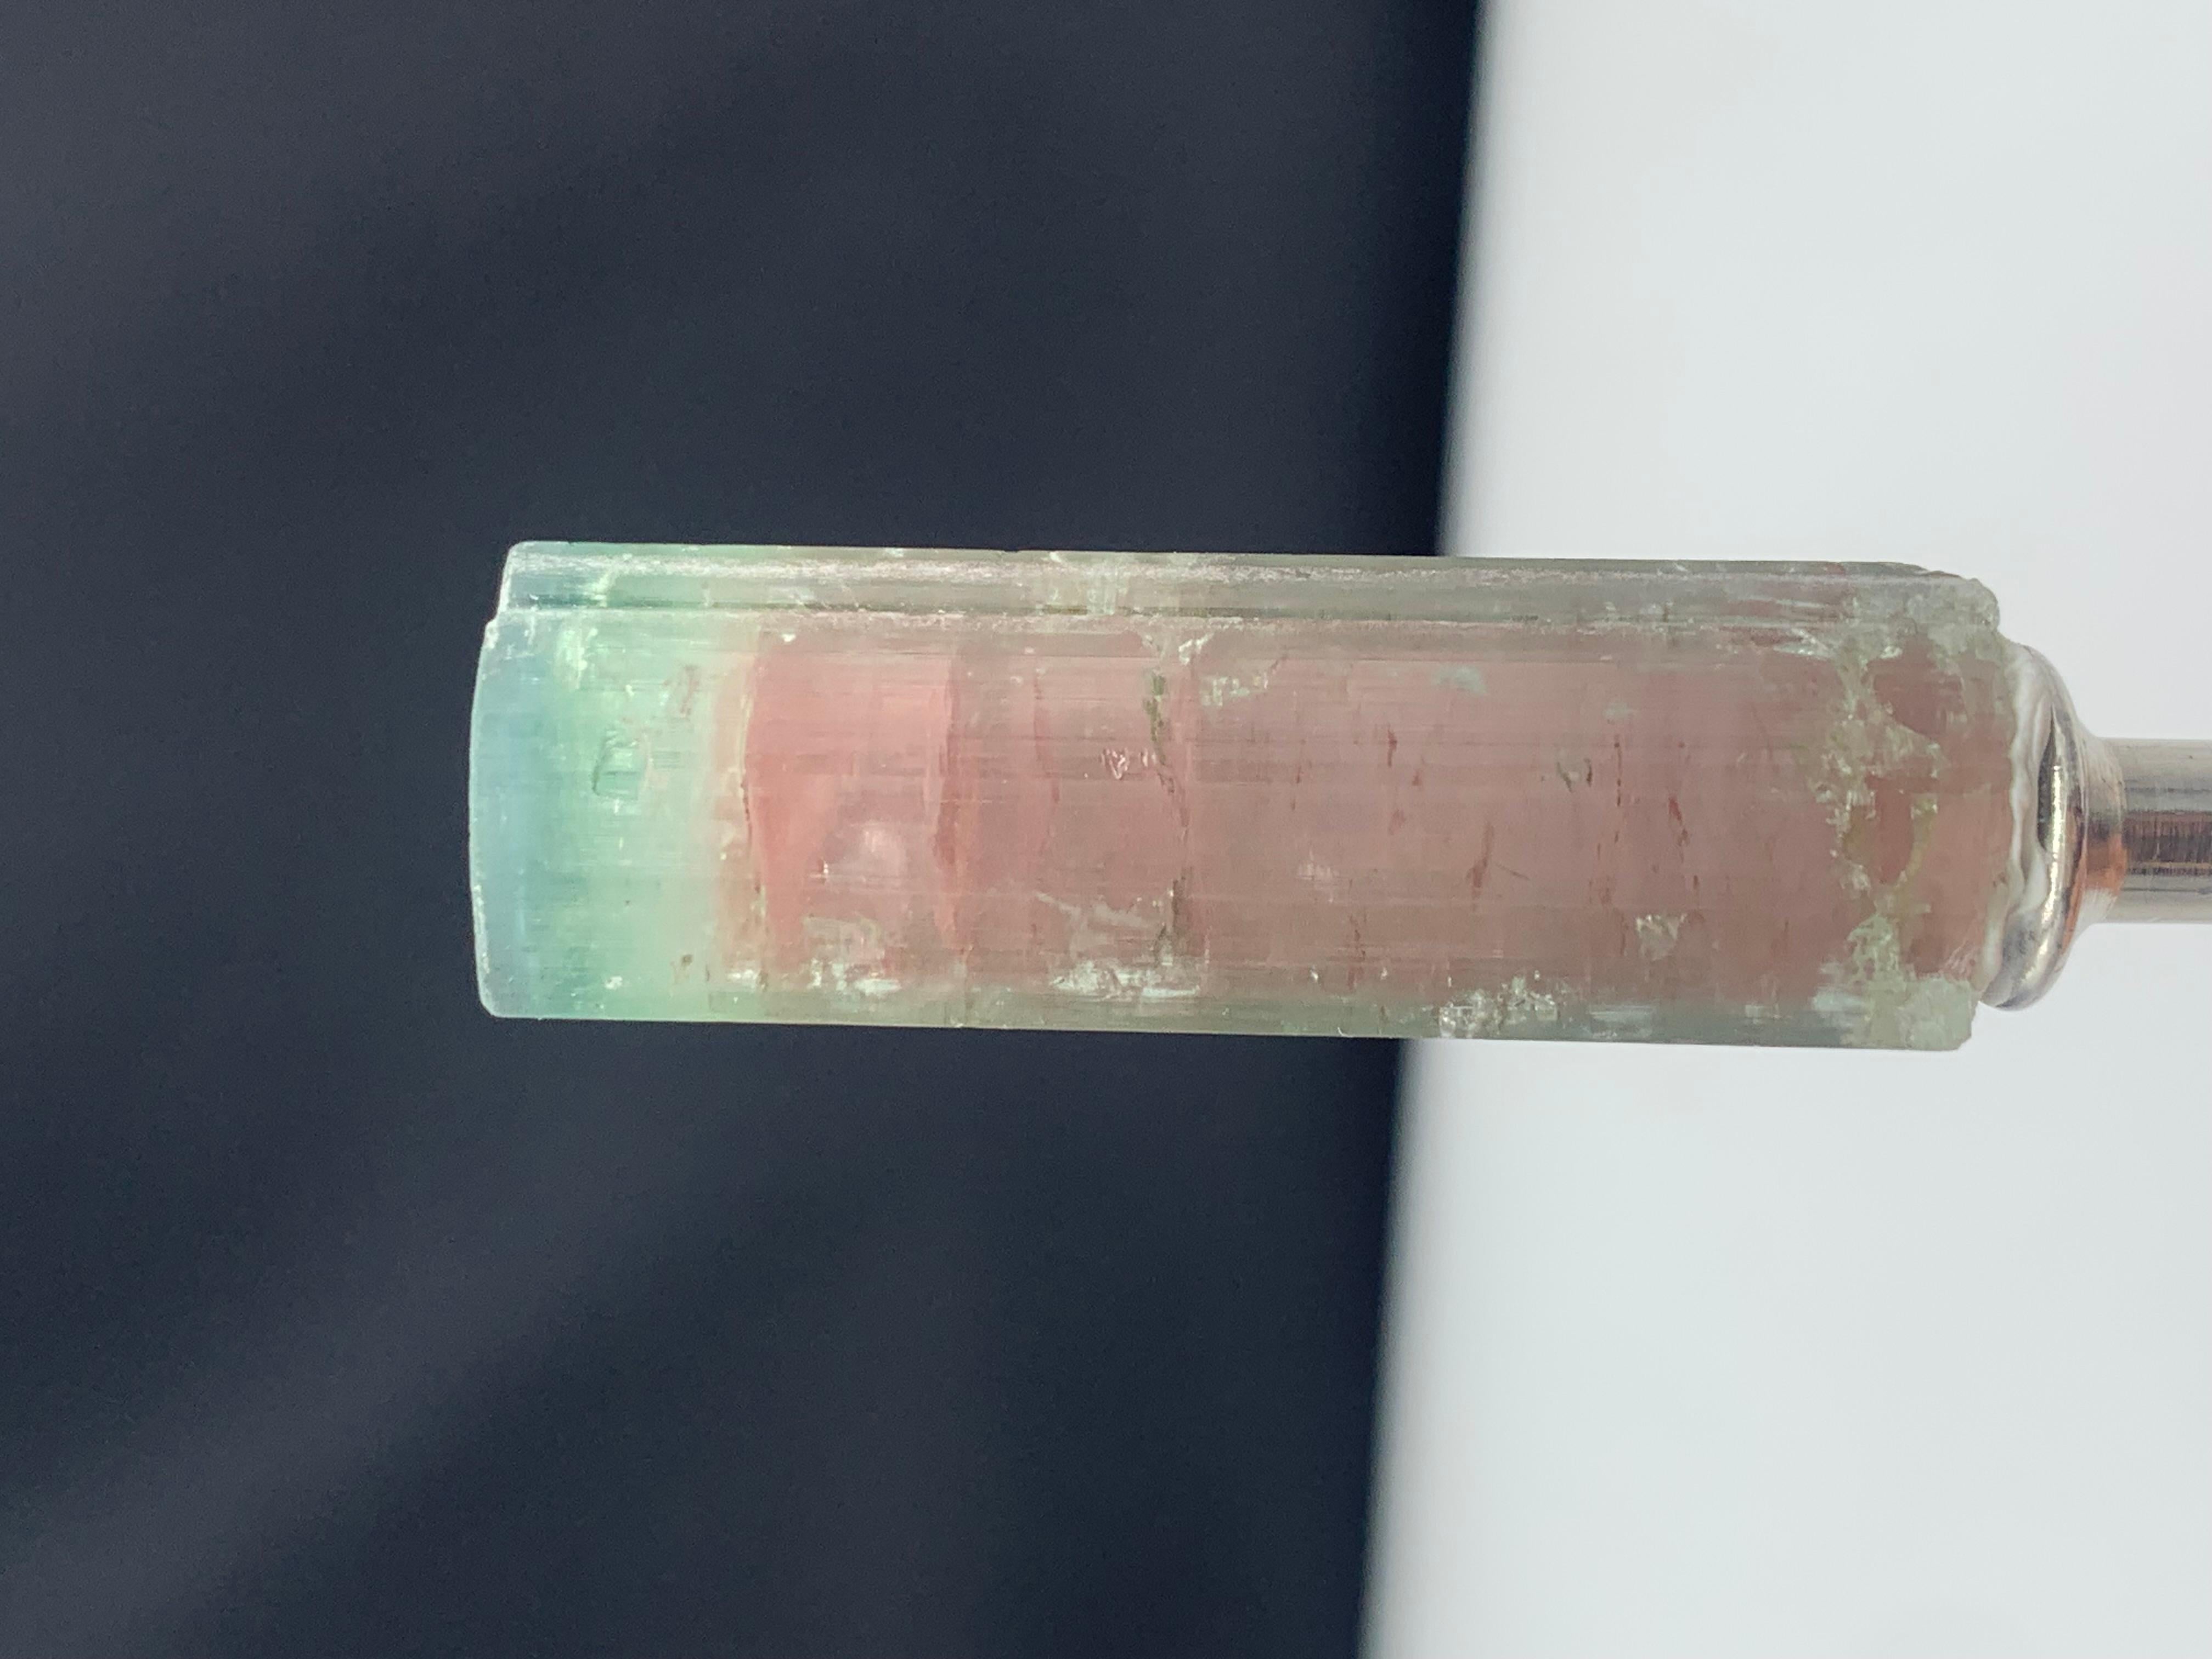 Stunning Bi-Color Tourmaline Crystal from Paprook, Afghanistan
WEIGHT: 65.70 Carat
DIMENSIONS: 6.8 x 1.3 x 1.3 Cm
ORIGIN: Afghanistan
COLOR: Pink and Mint Green
TREATMENT: None
Tourmaline is an extremely popular gemstone; the name Tourmaline